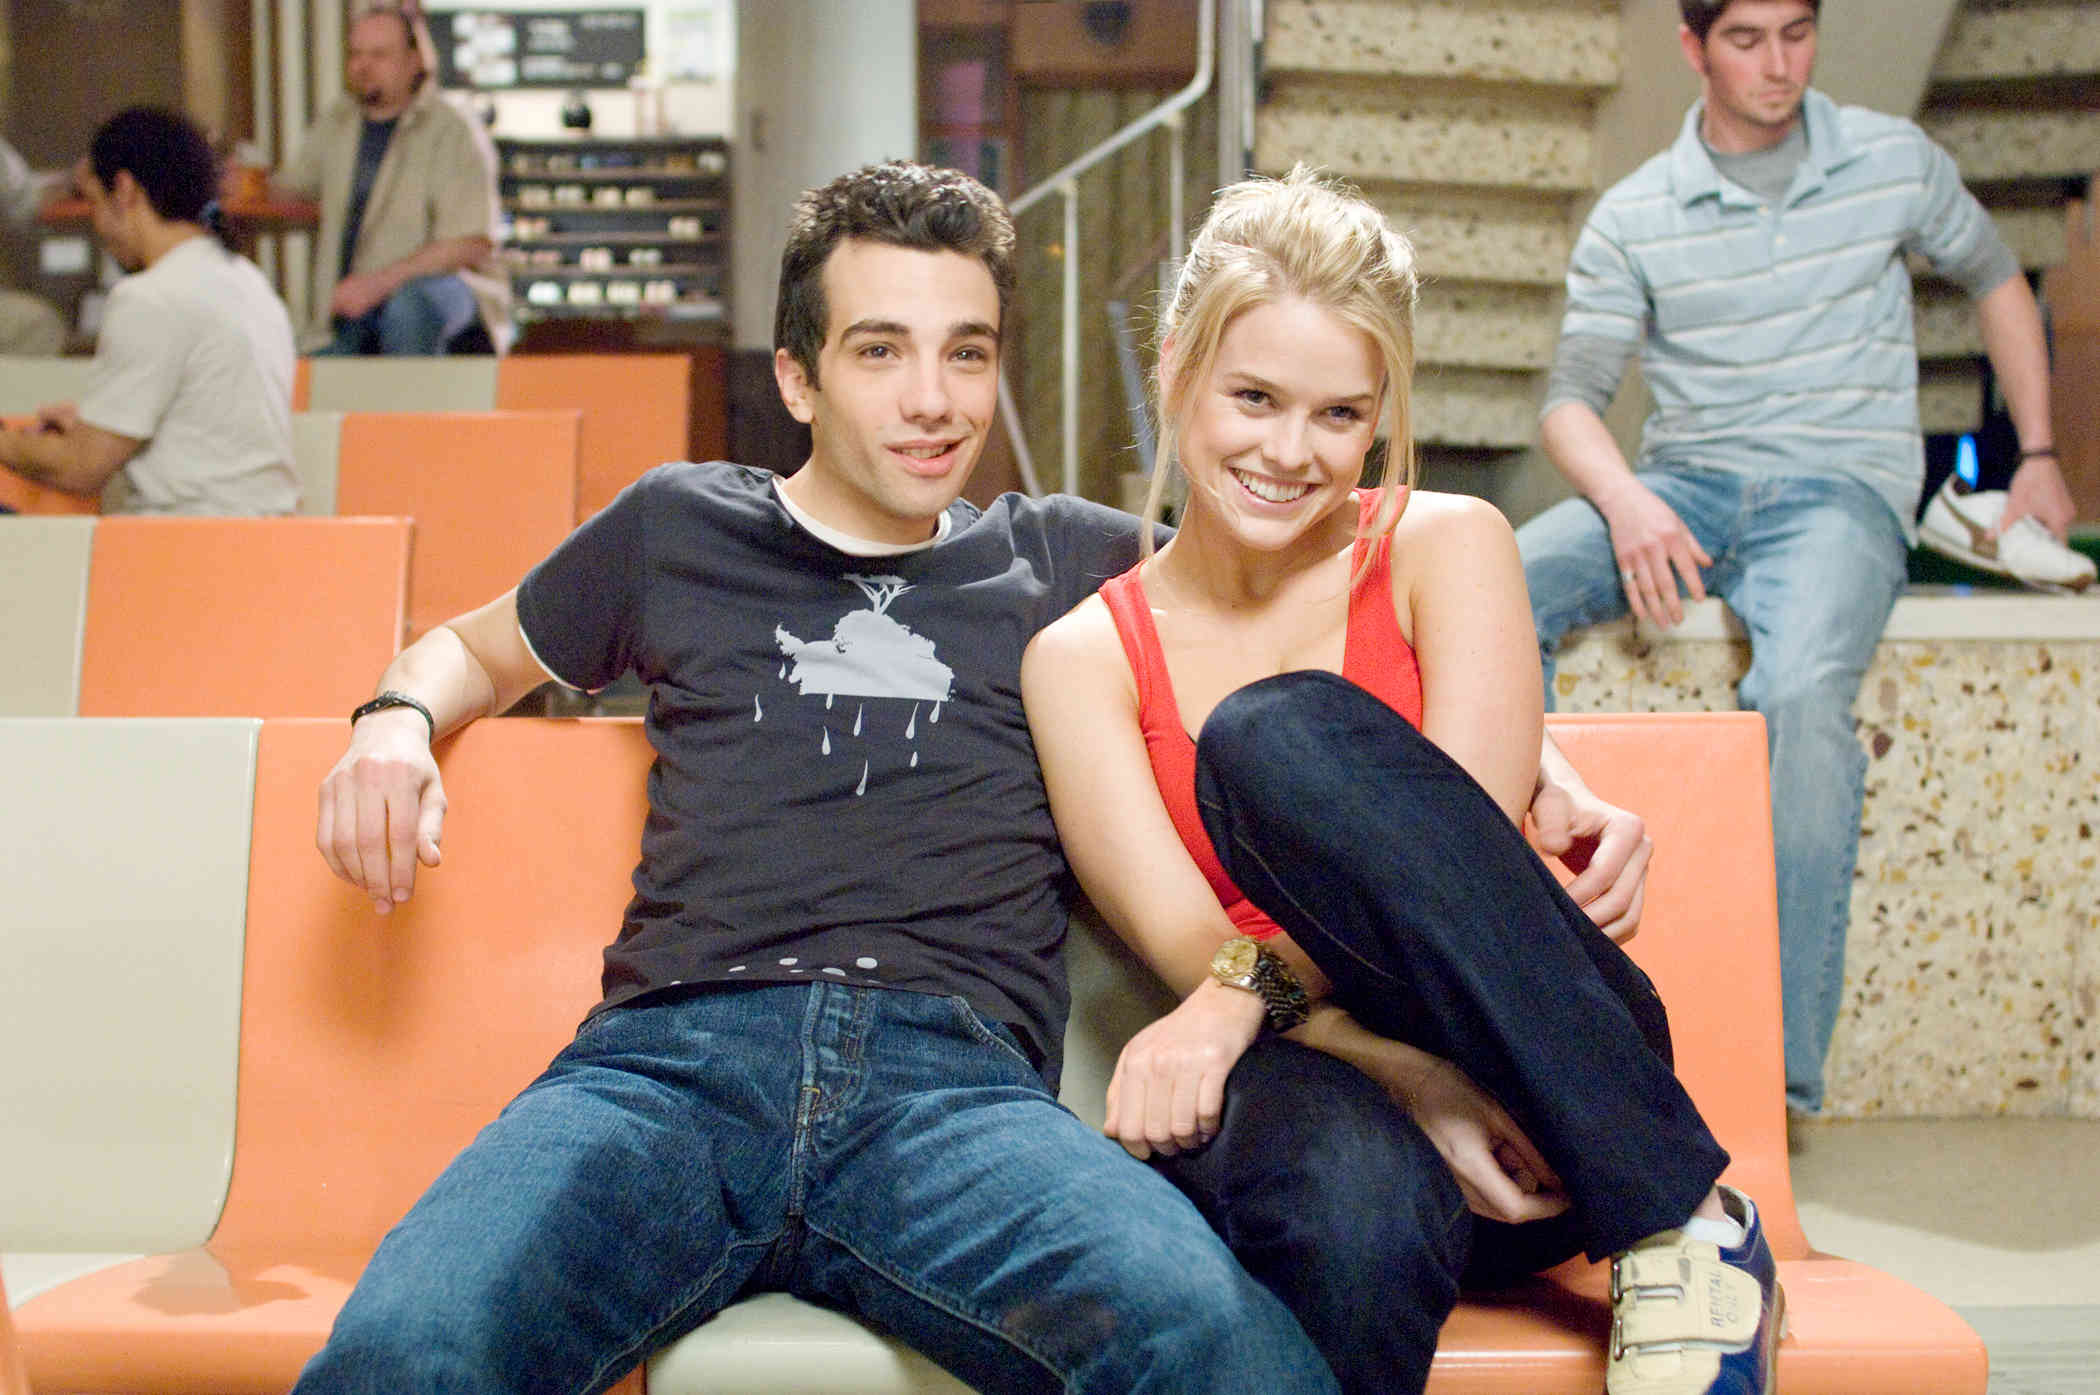 Jay Baruchel stars as Kirk Kettner and Alice Eve stars as Molly in DreamWorks SKG's She's Out of My League (2010). Photo credit by Darren Michaels.